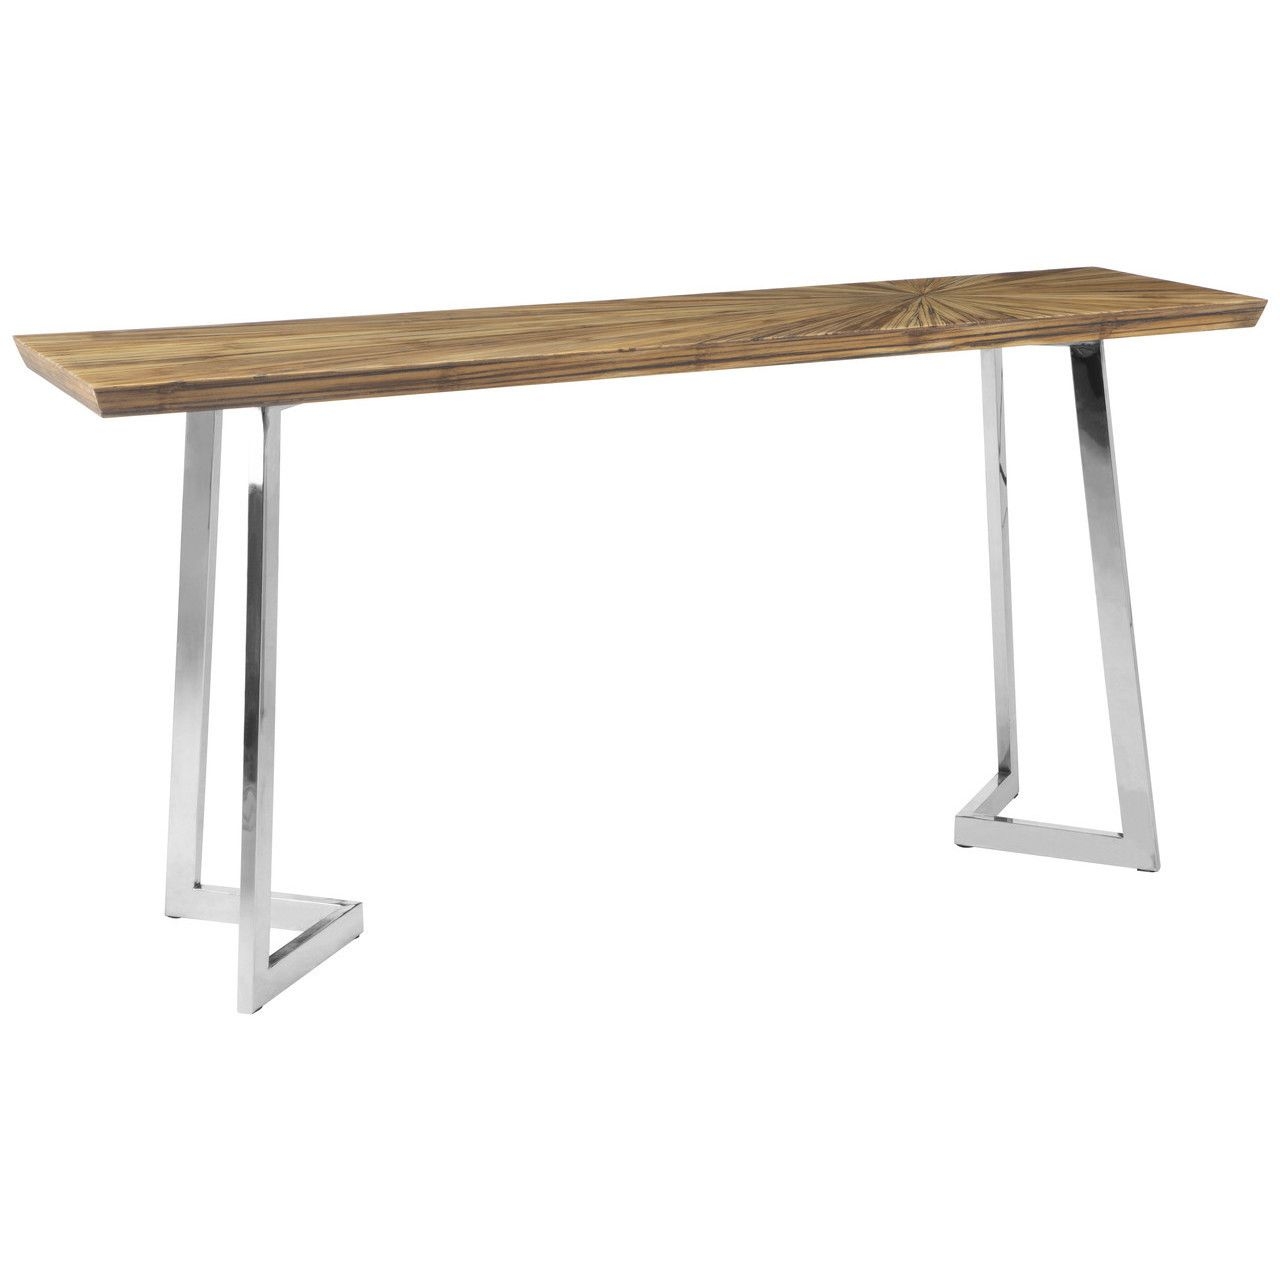 Gabar Wooden Console Table In Natural With Silver Stainless Steel Legs